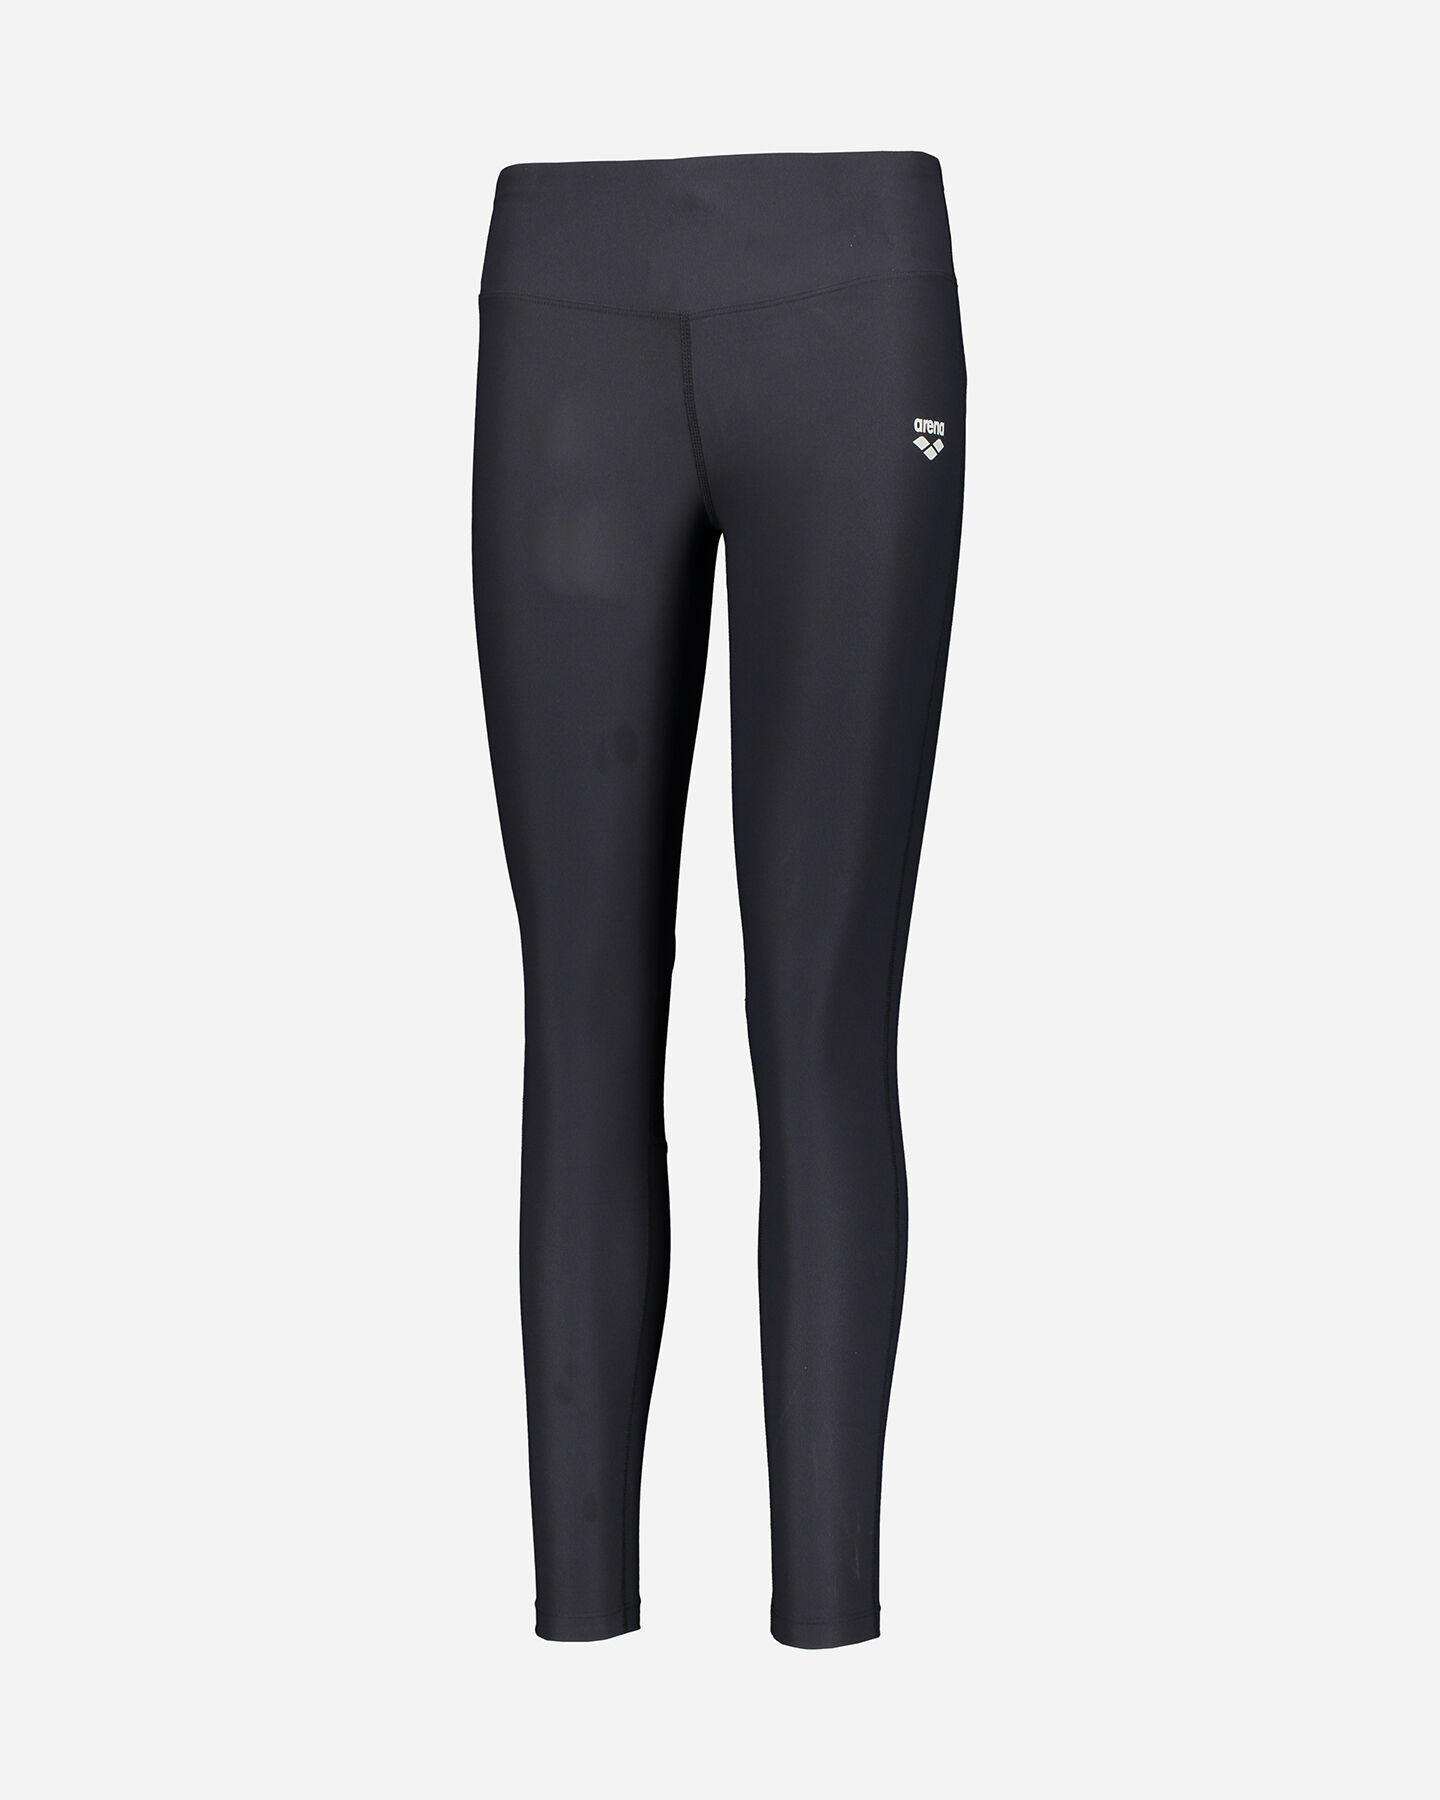  Leggings ARENA WORKOUT W S5043411|505|XS scatto 0